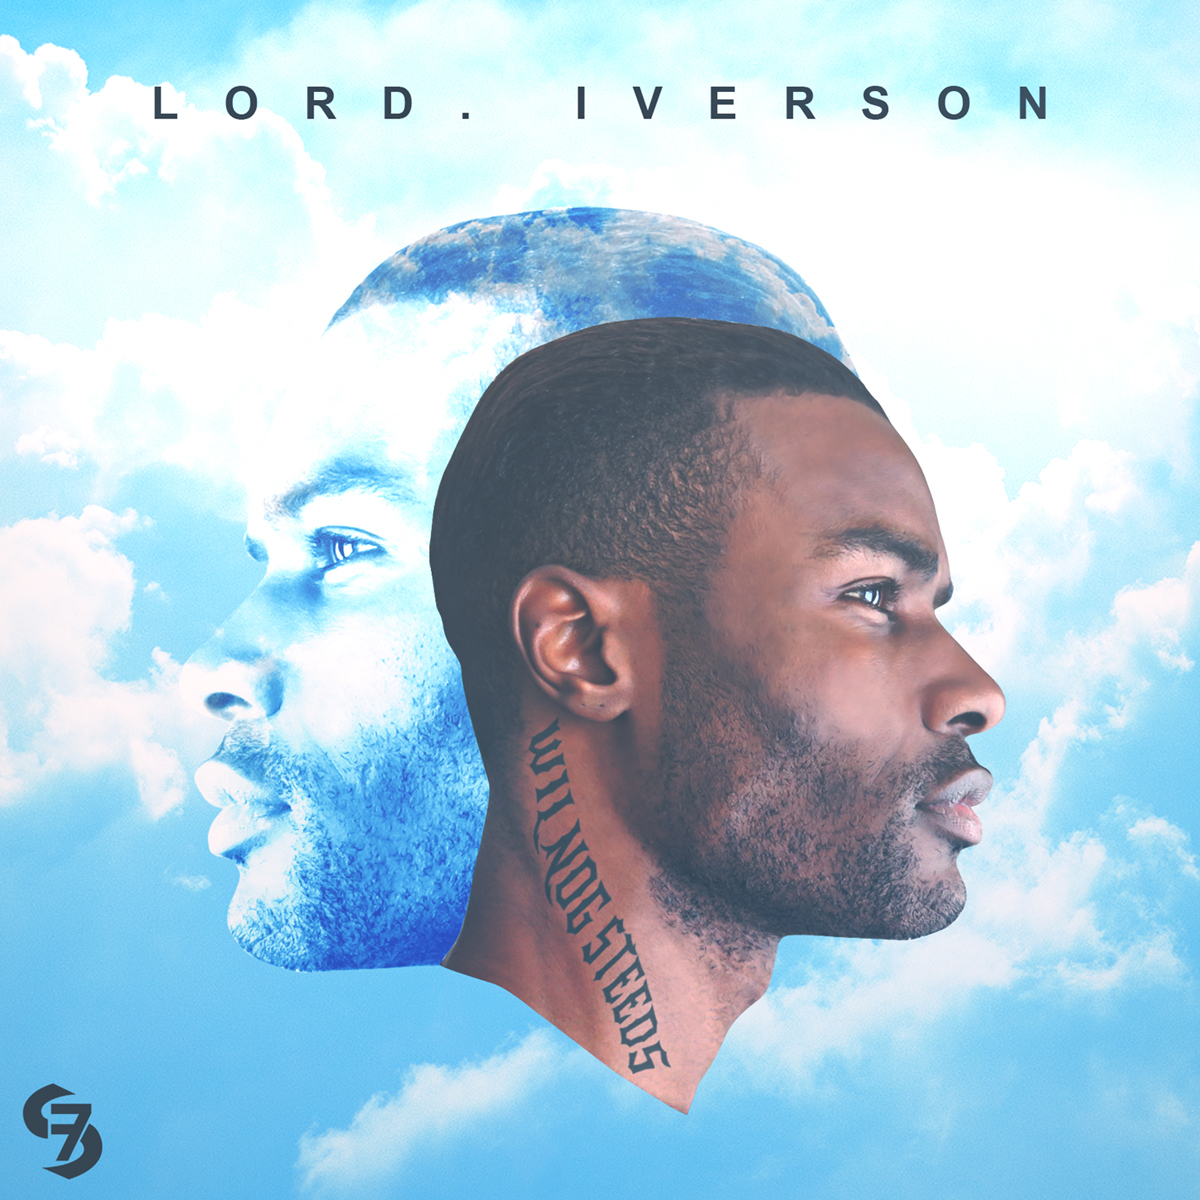 “Lord-iverson-wil-nog-steeds-cover”